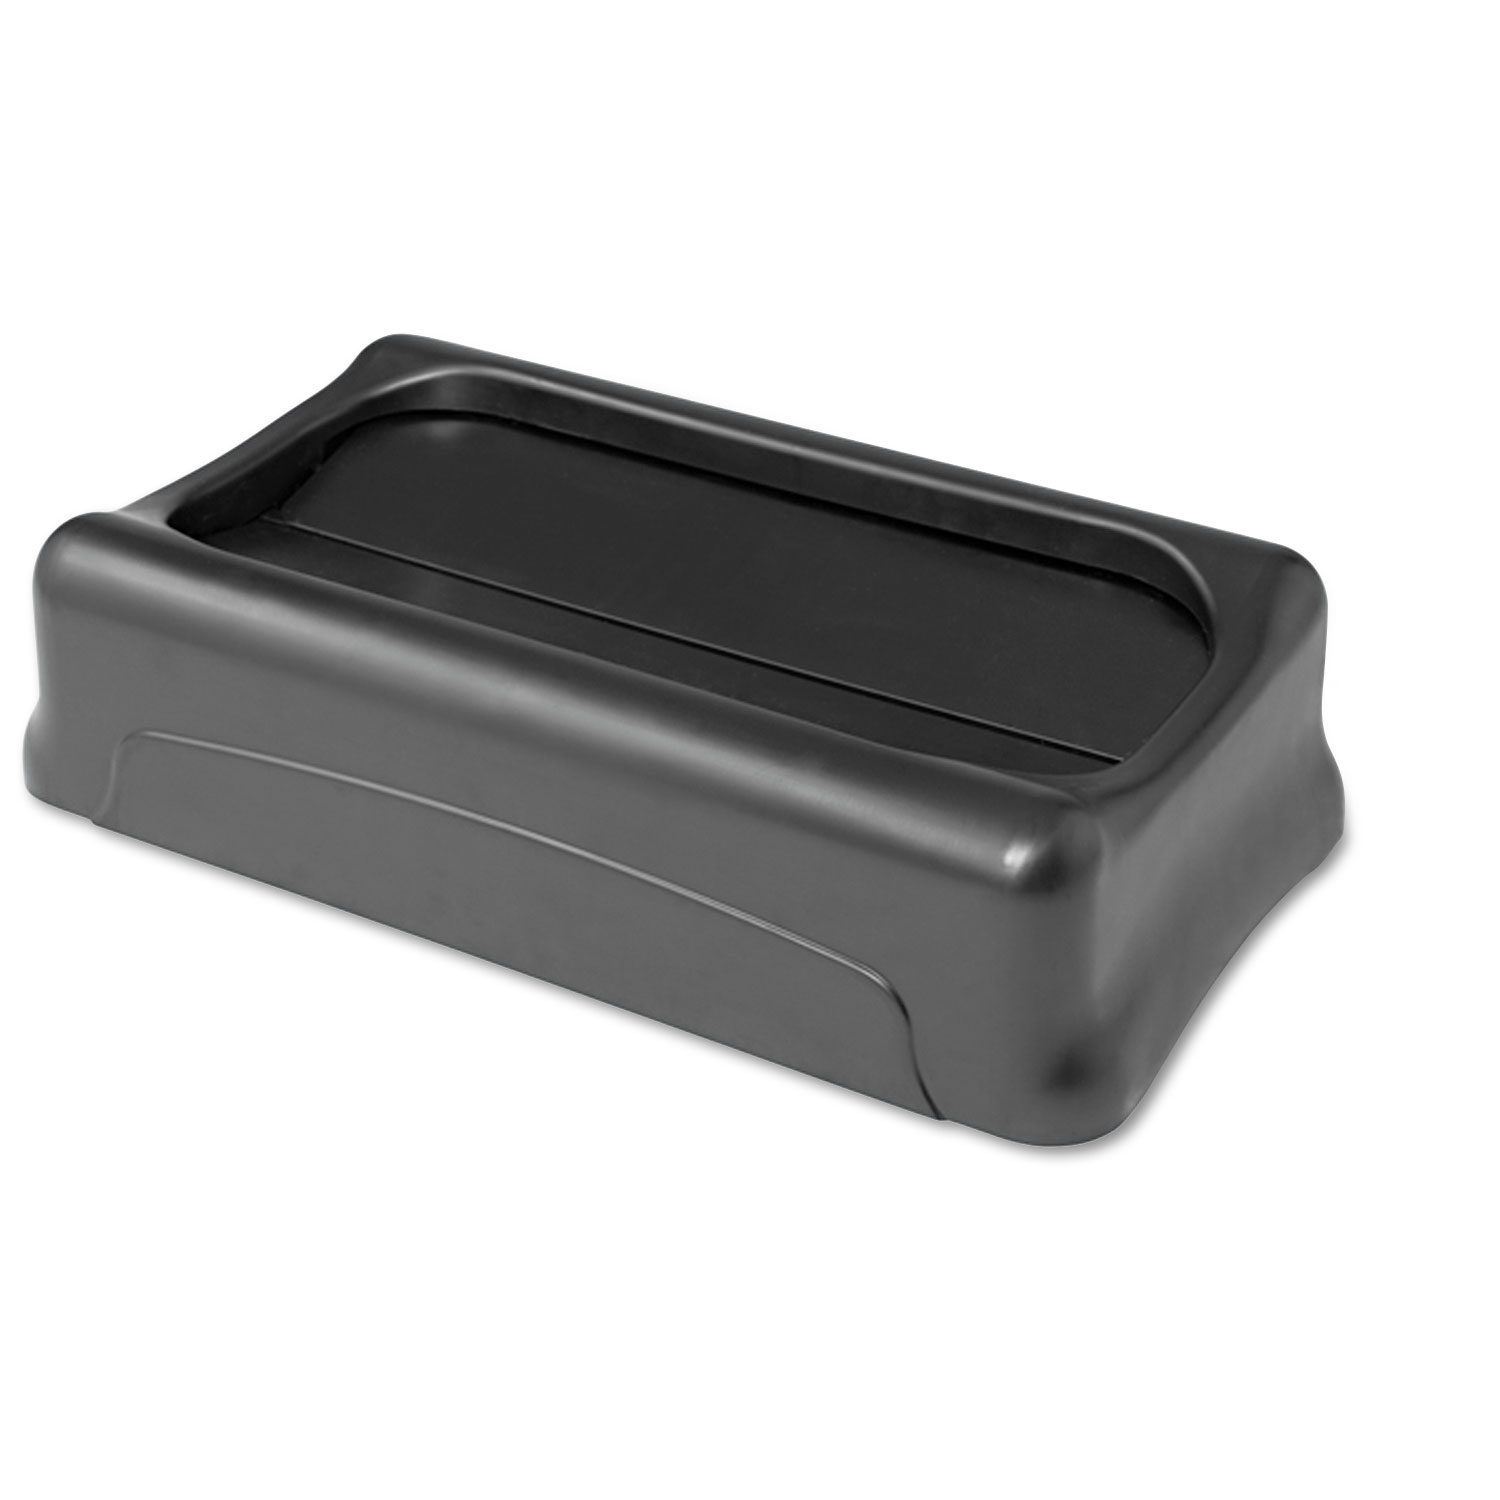  Rubbermaid Commercial FG267360BLA Swing Top Lid for Slim Jim Waste Containers, 11.38w x 20.5d x 5h, Plastic, Black (RCP267360BK) 